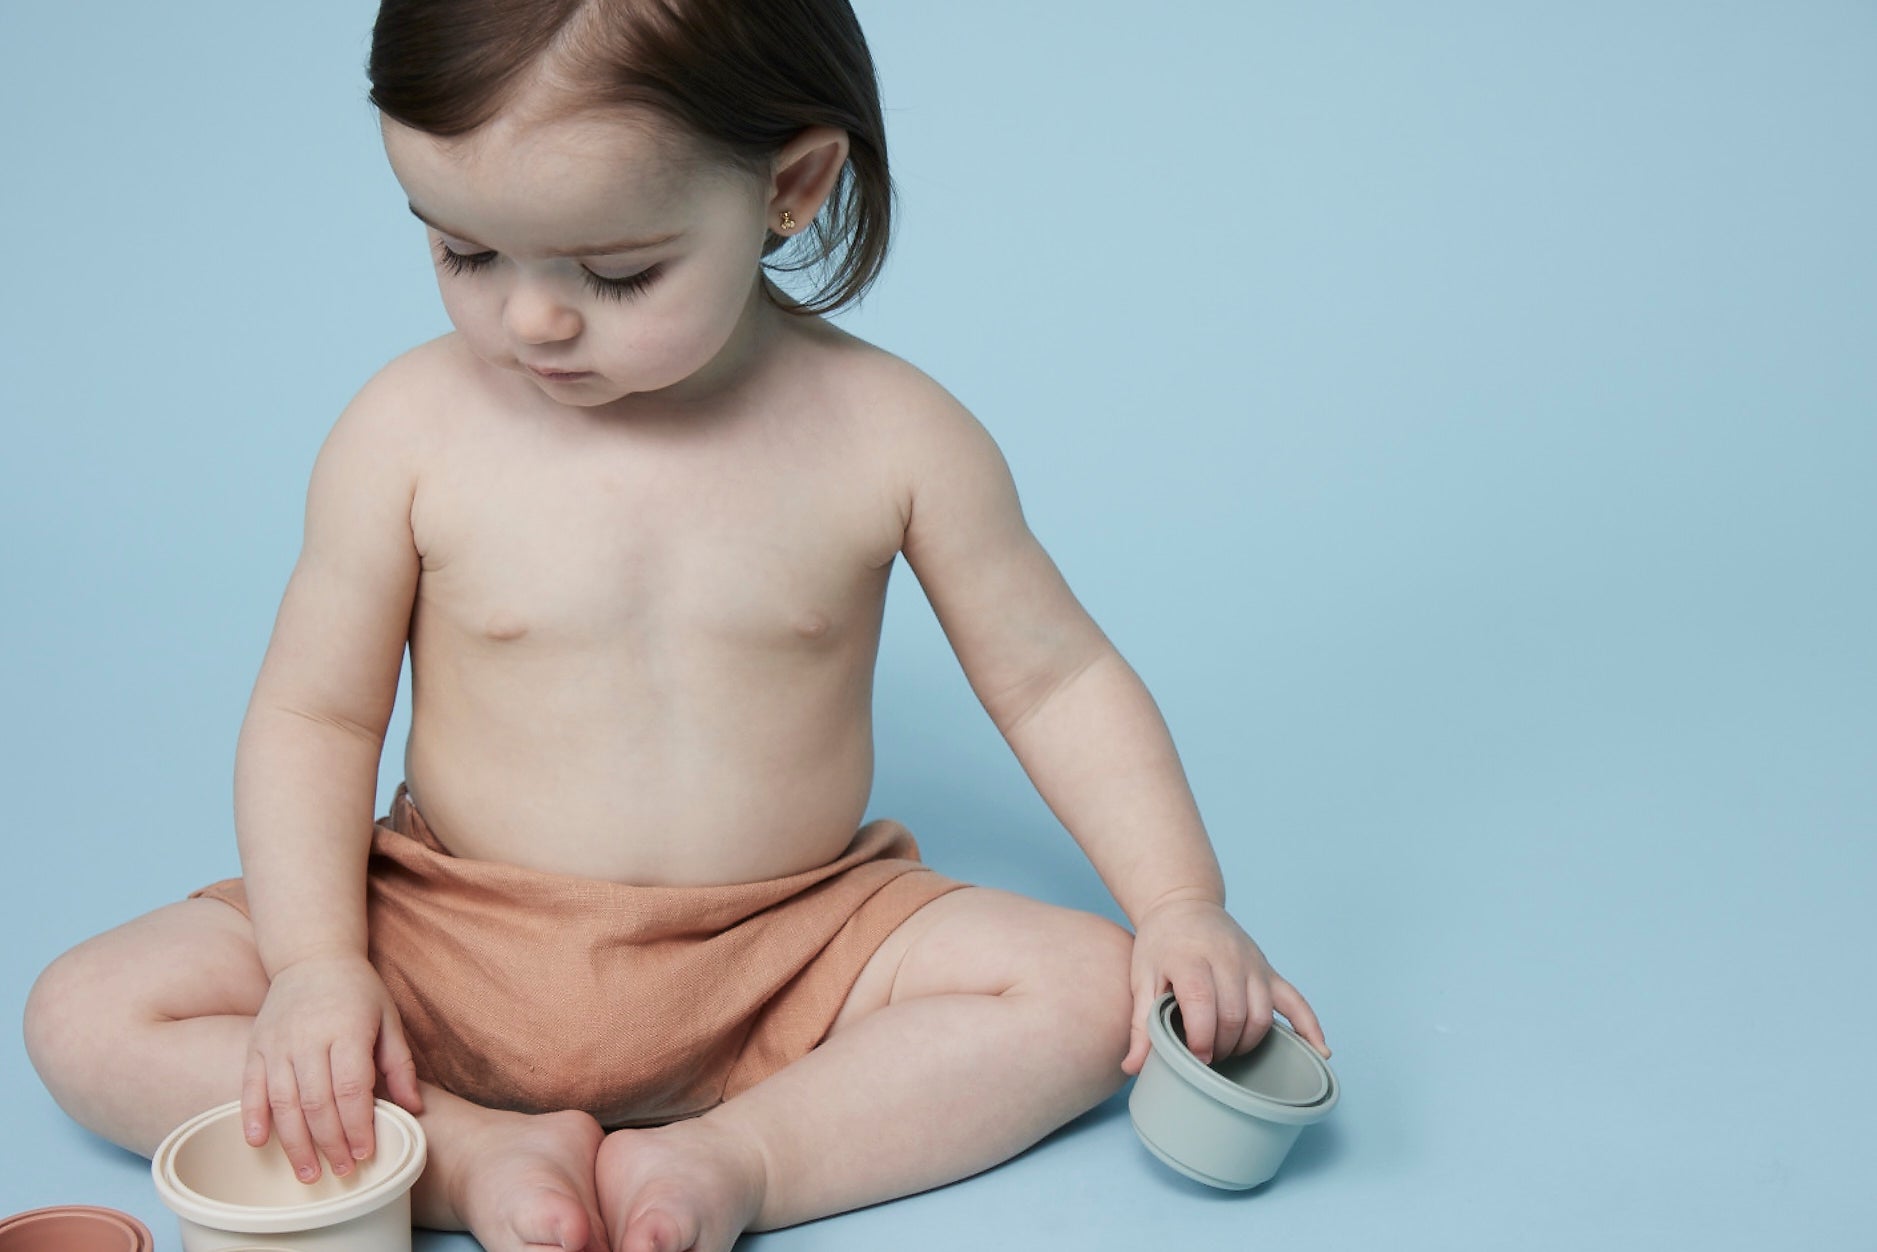 EllaOla Expert Series: Our Doctor’s Tips for Soothing Baby Eczema